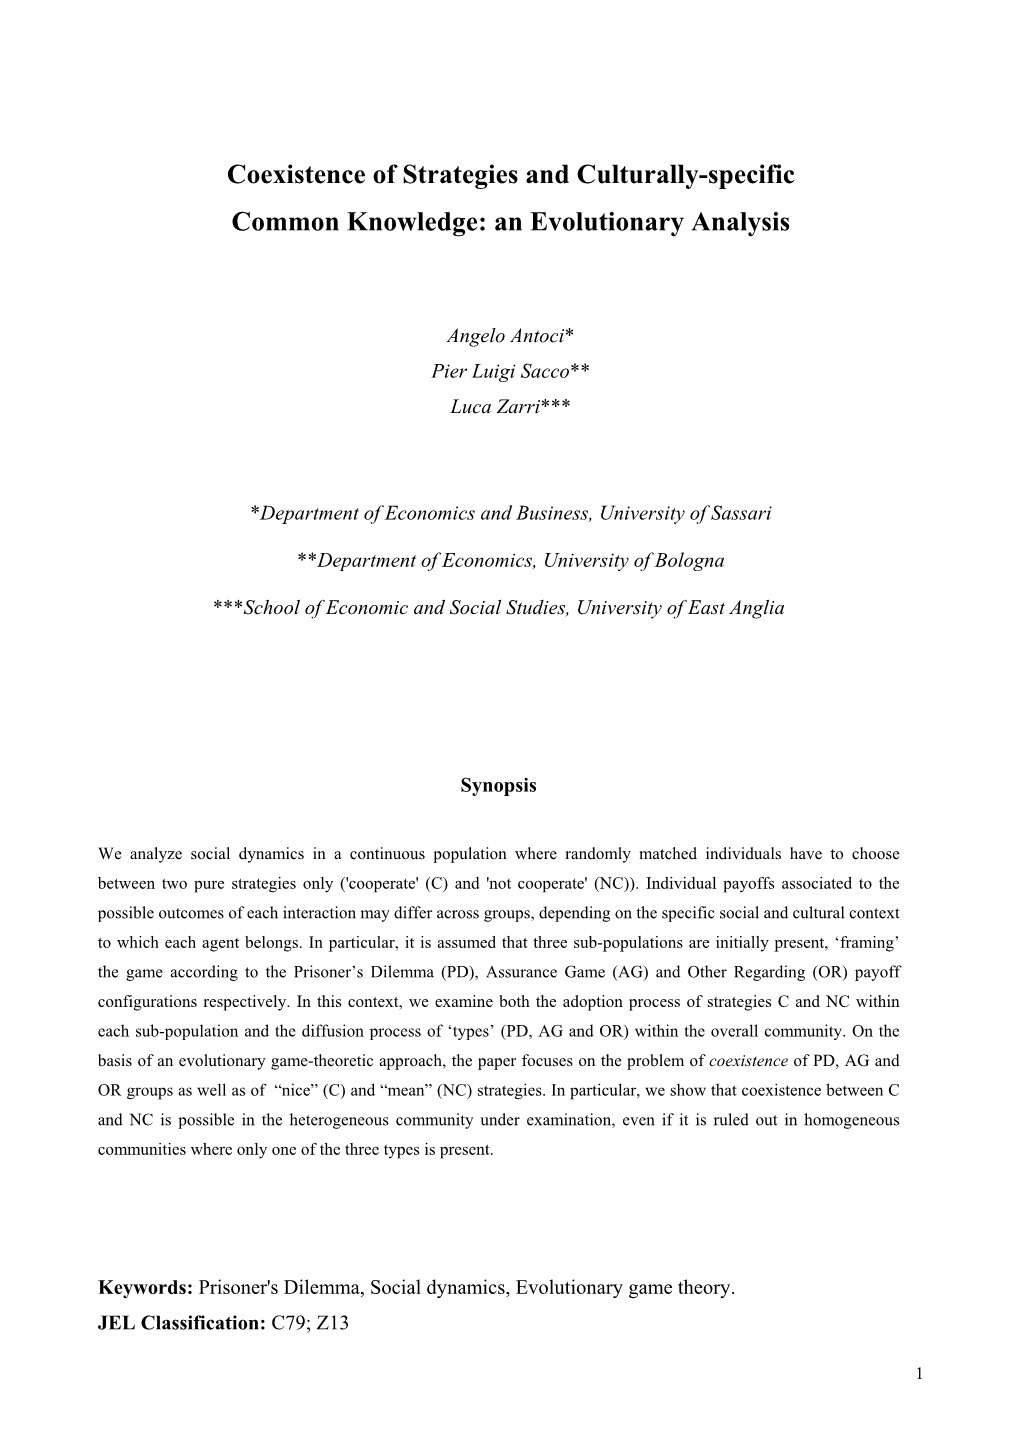 Coexistence of Strategies and Culturally-Specific Common Knowledge: an Evolutionary Analysis